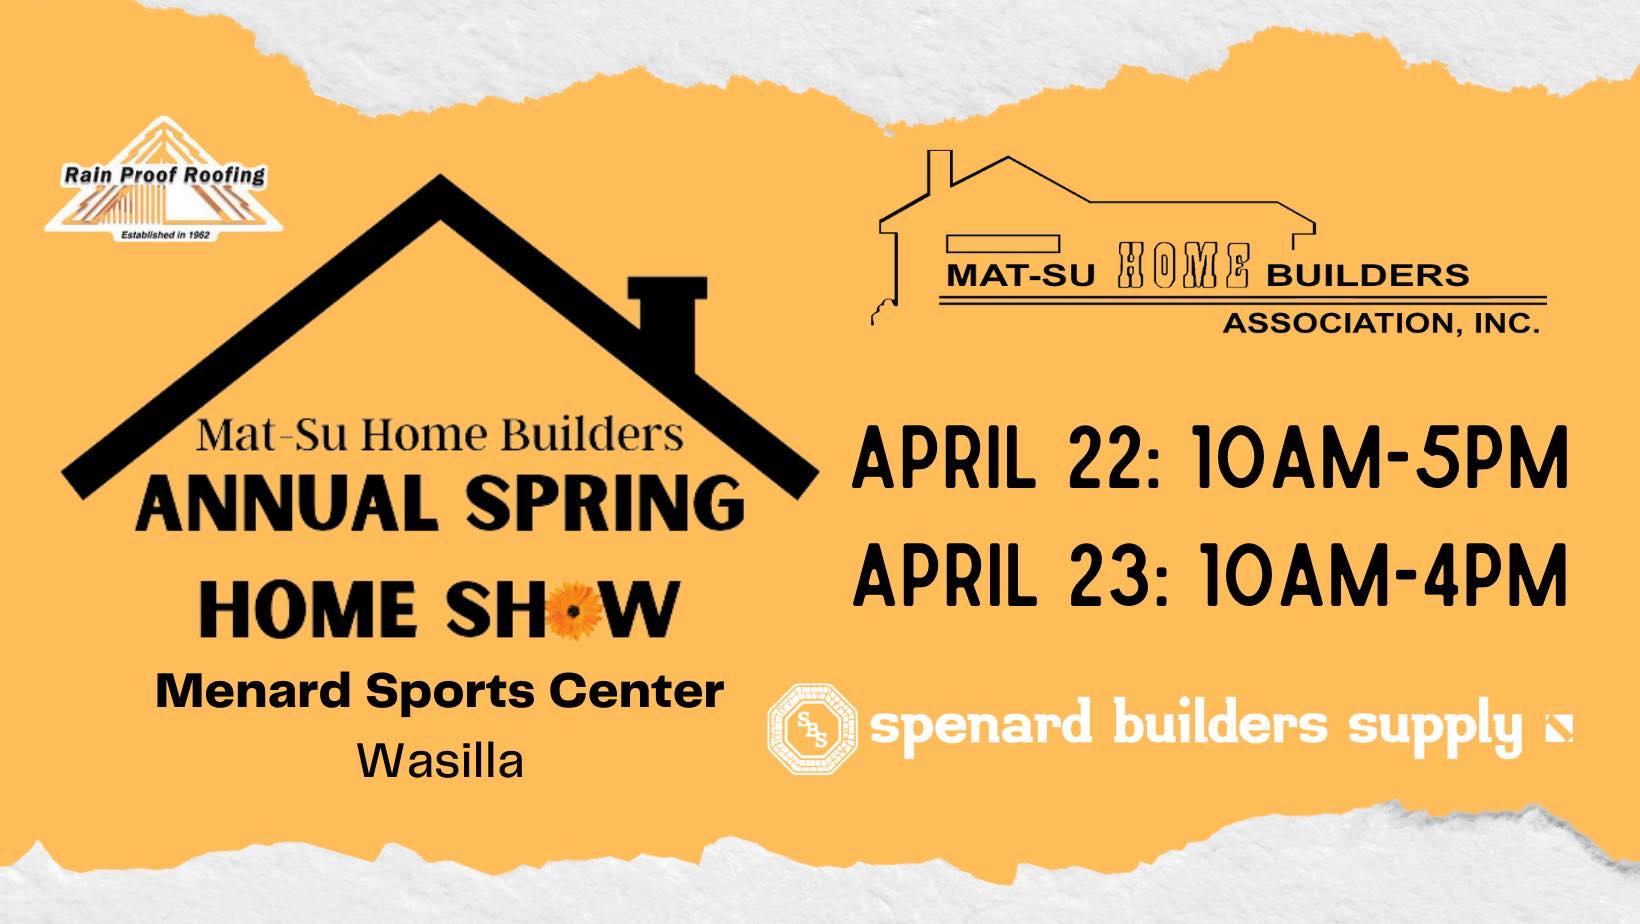 <h1 class="tribe-events-single-event-title">Don’t Miss the Spring Home Show!</h1>